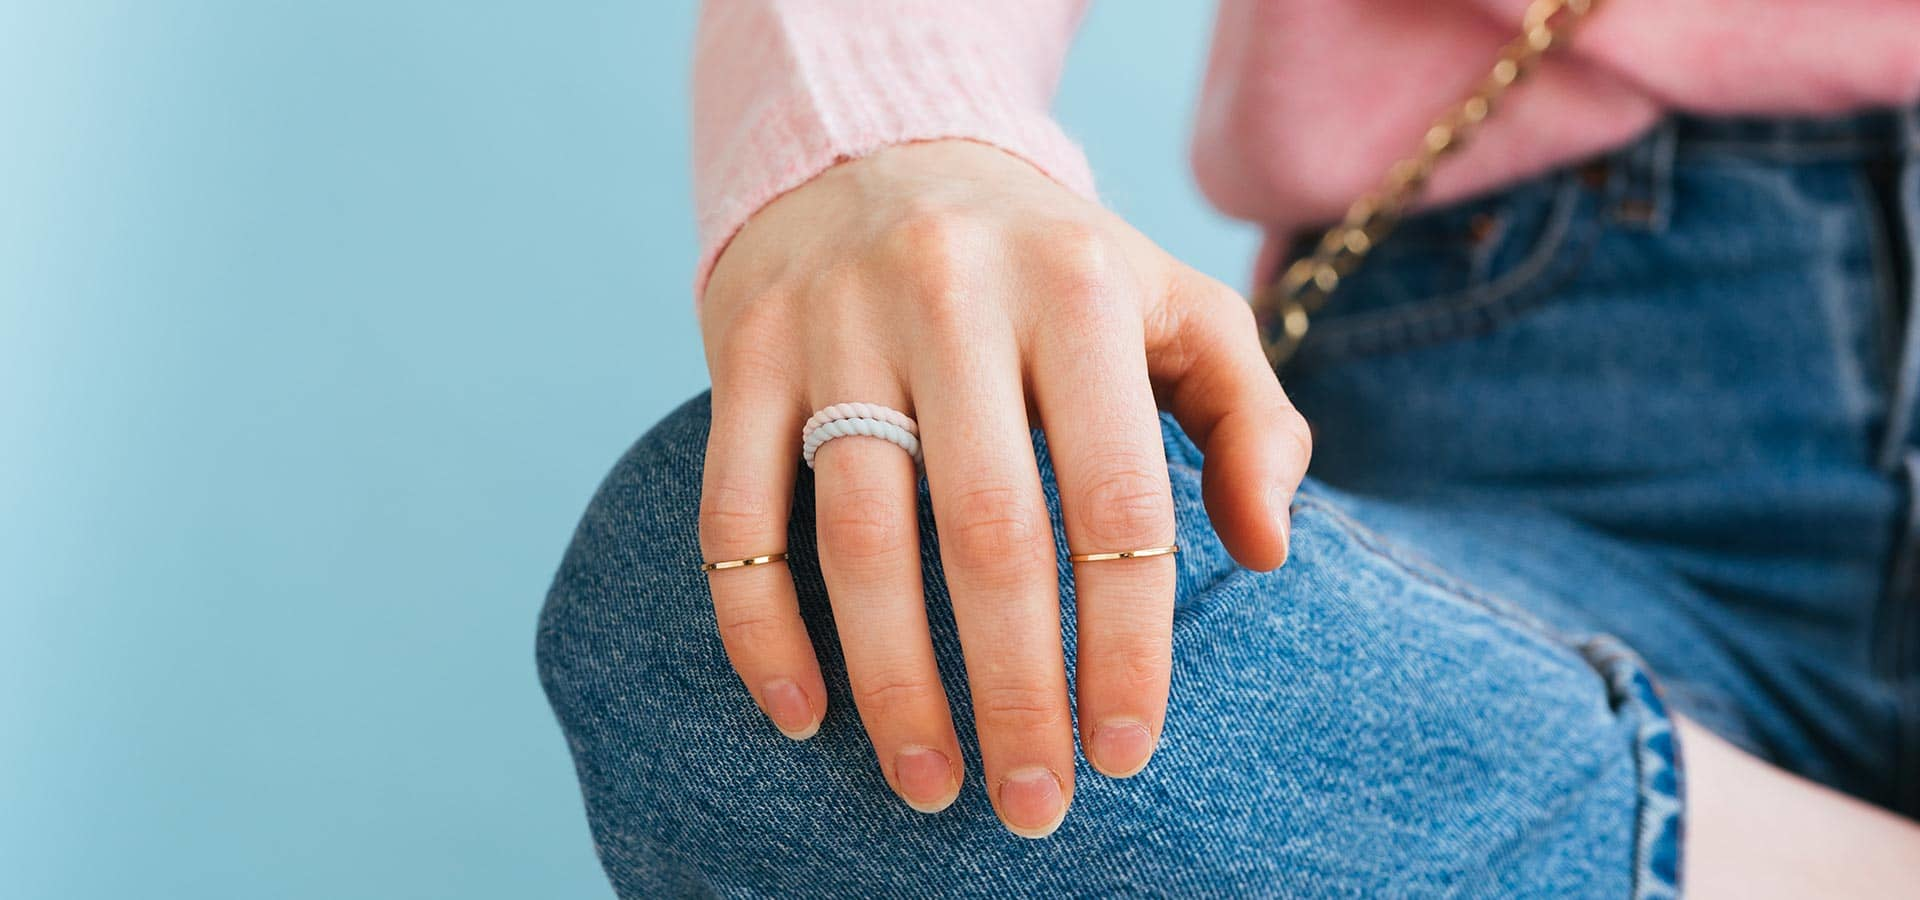 How tight should an engagement ring fit?